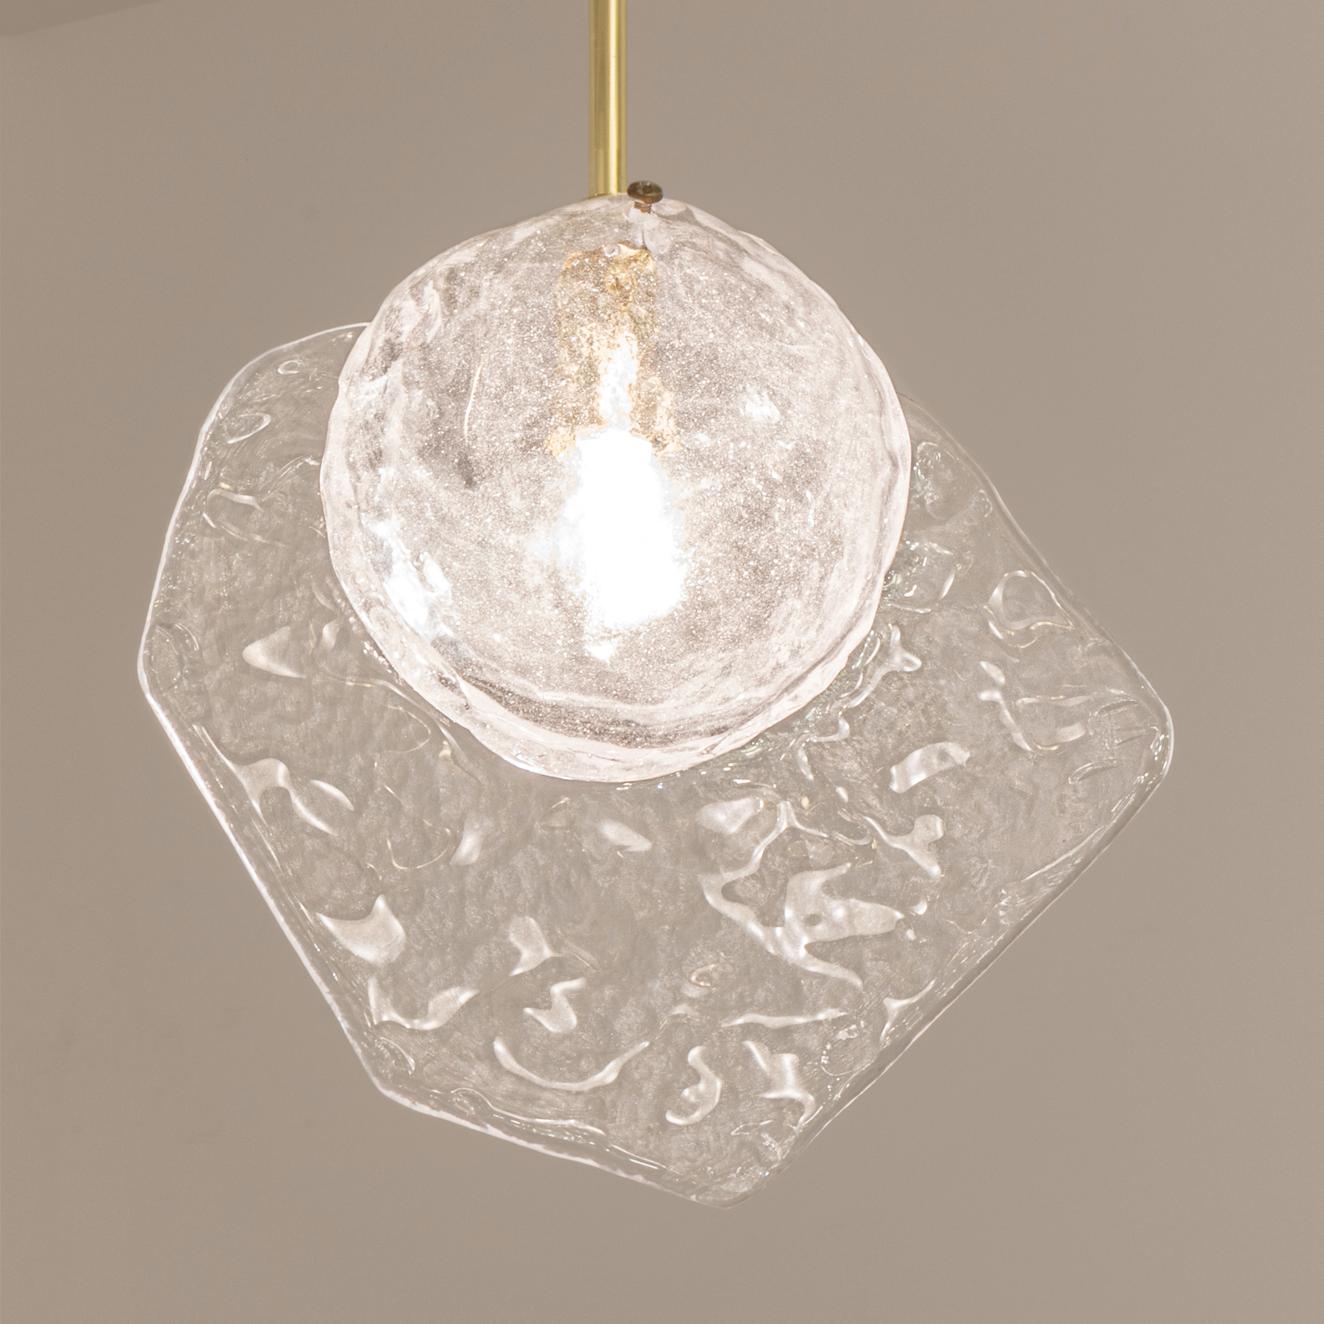 Inspired by the breeze of the venetian lagoon, the Brezza pendant, is constructed from hand blown Murano glass with a bubble infused core and a textured fin. Shown on a polished brass stem.

Customization Options: 

Available in any of our 10